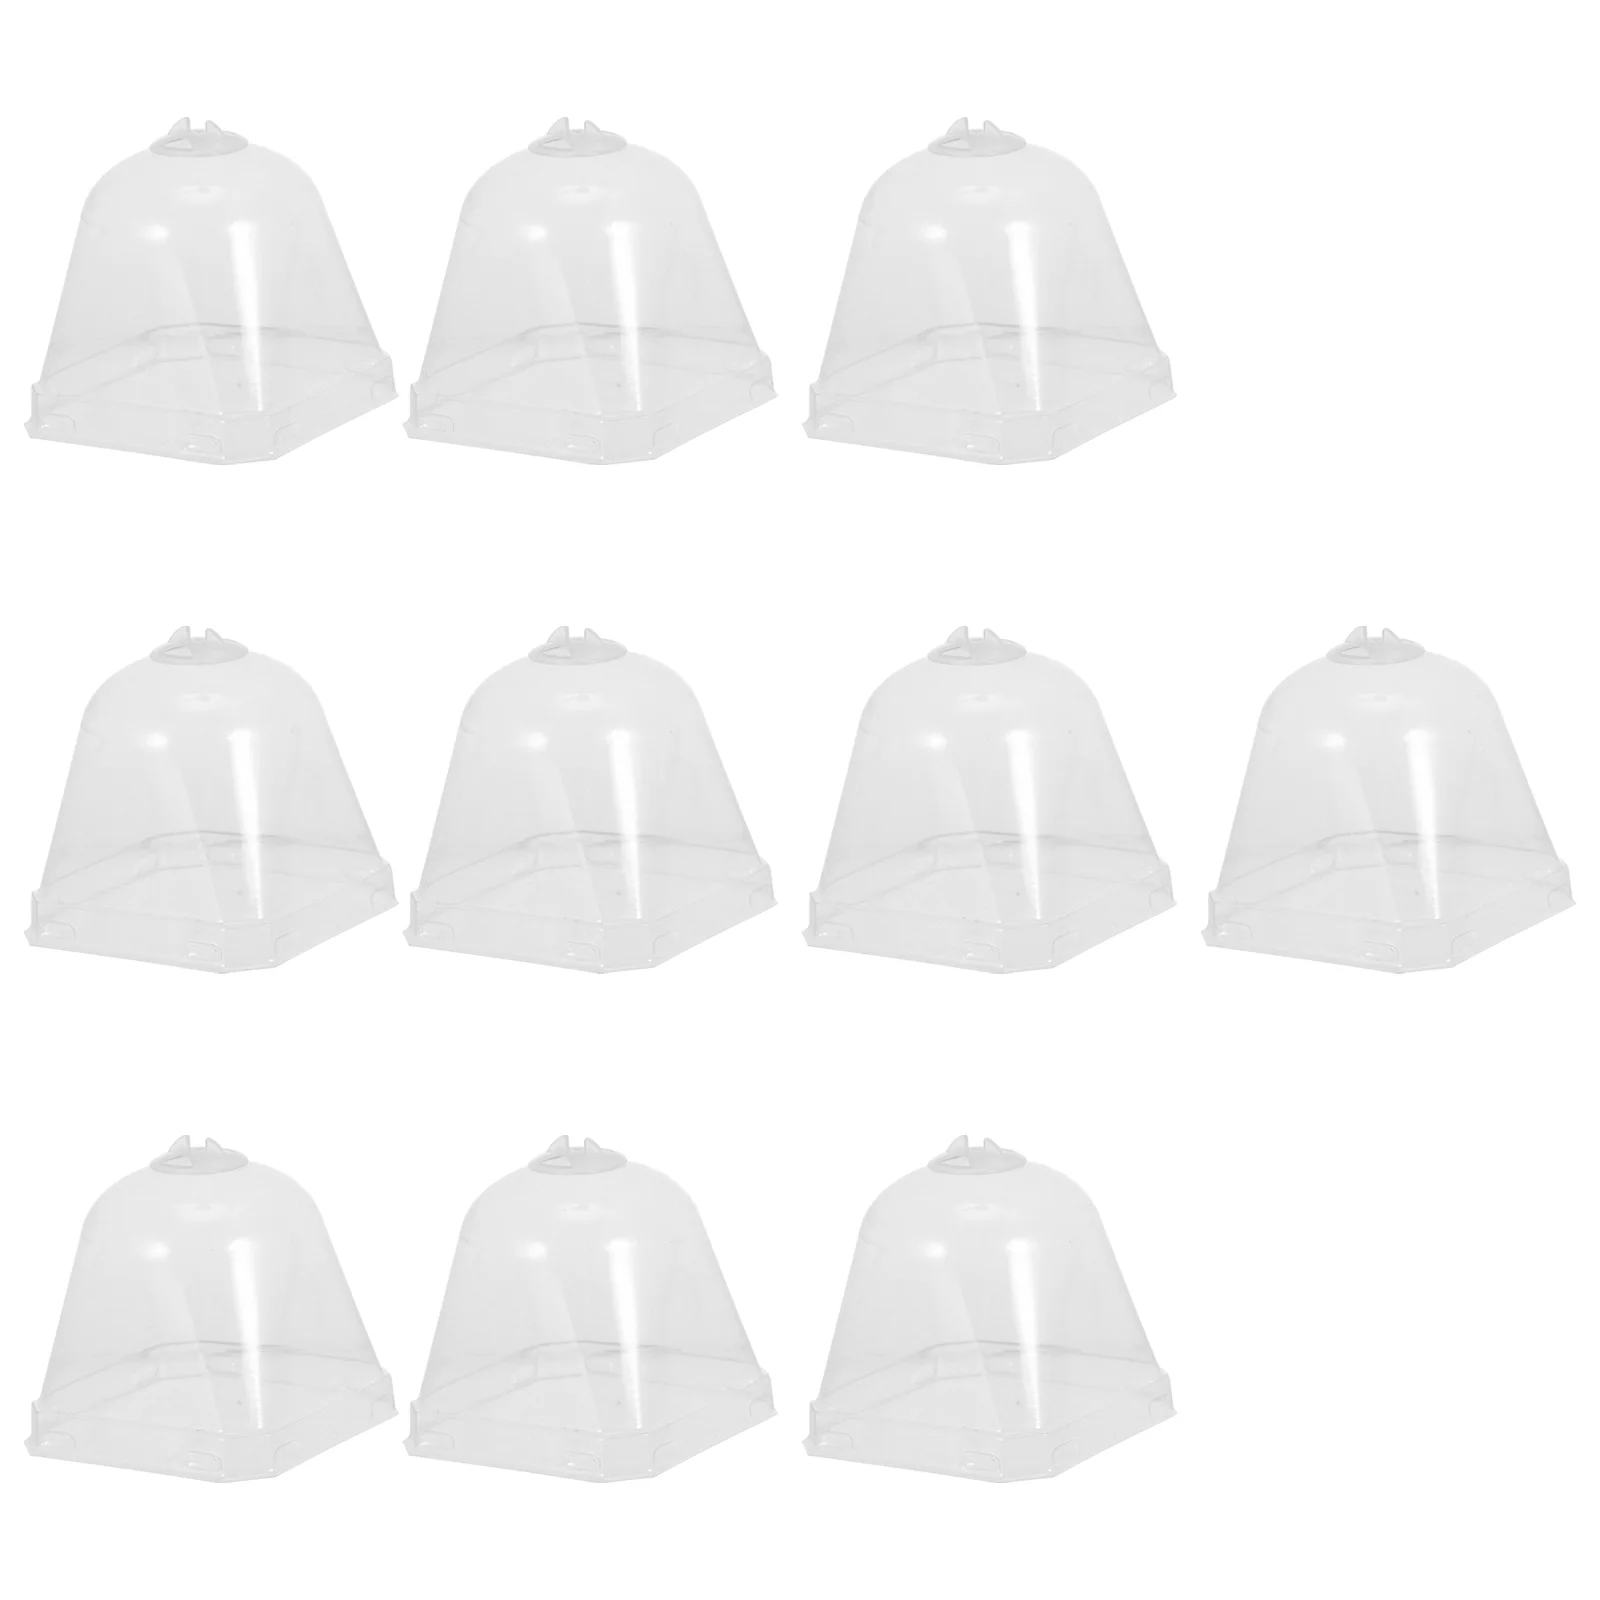 

10pcs Cover Reusable Greenhouse Garden Cloche Dome Cover Frost Guard Freeze Protection Moisturize Cover for Potted Plants 7CM